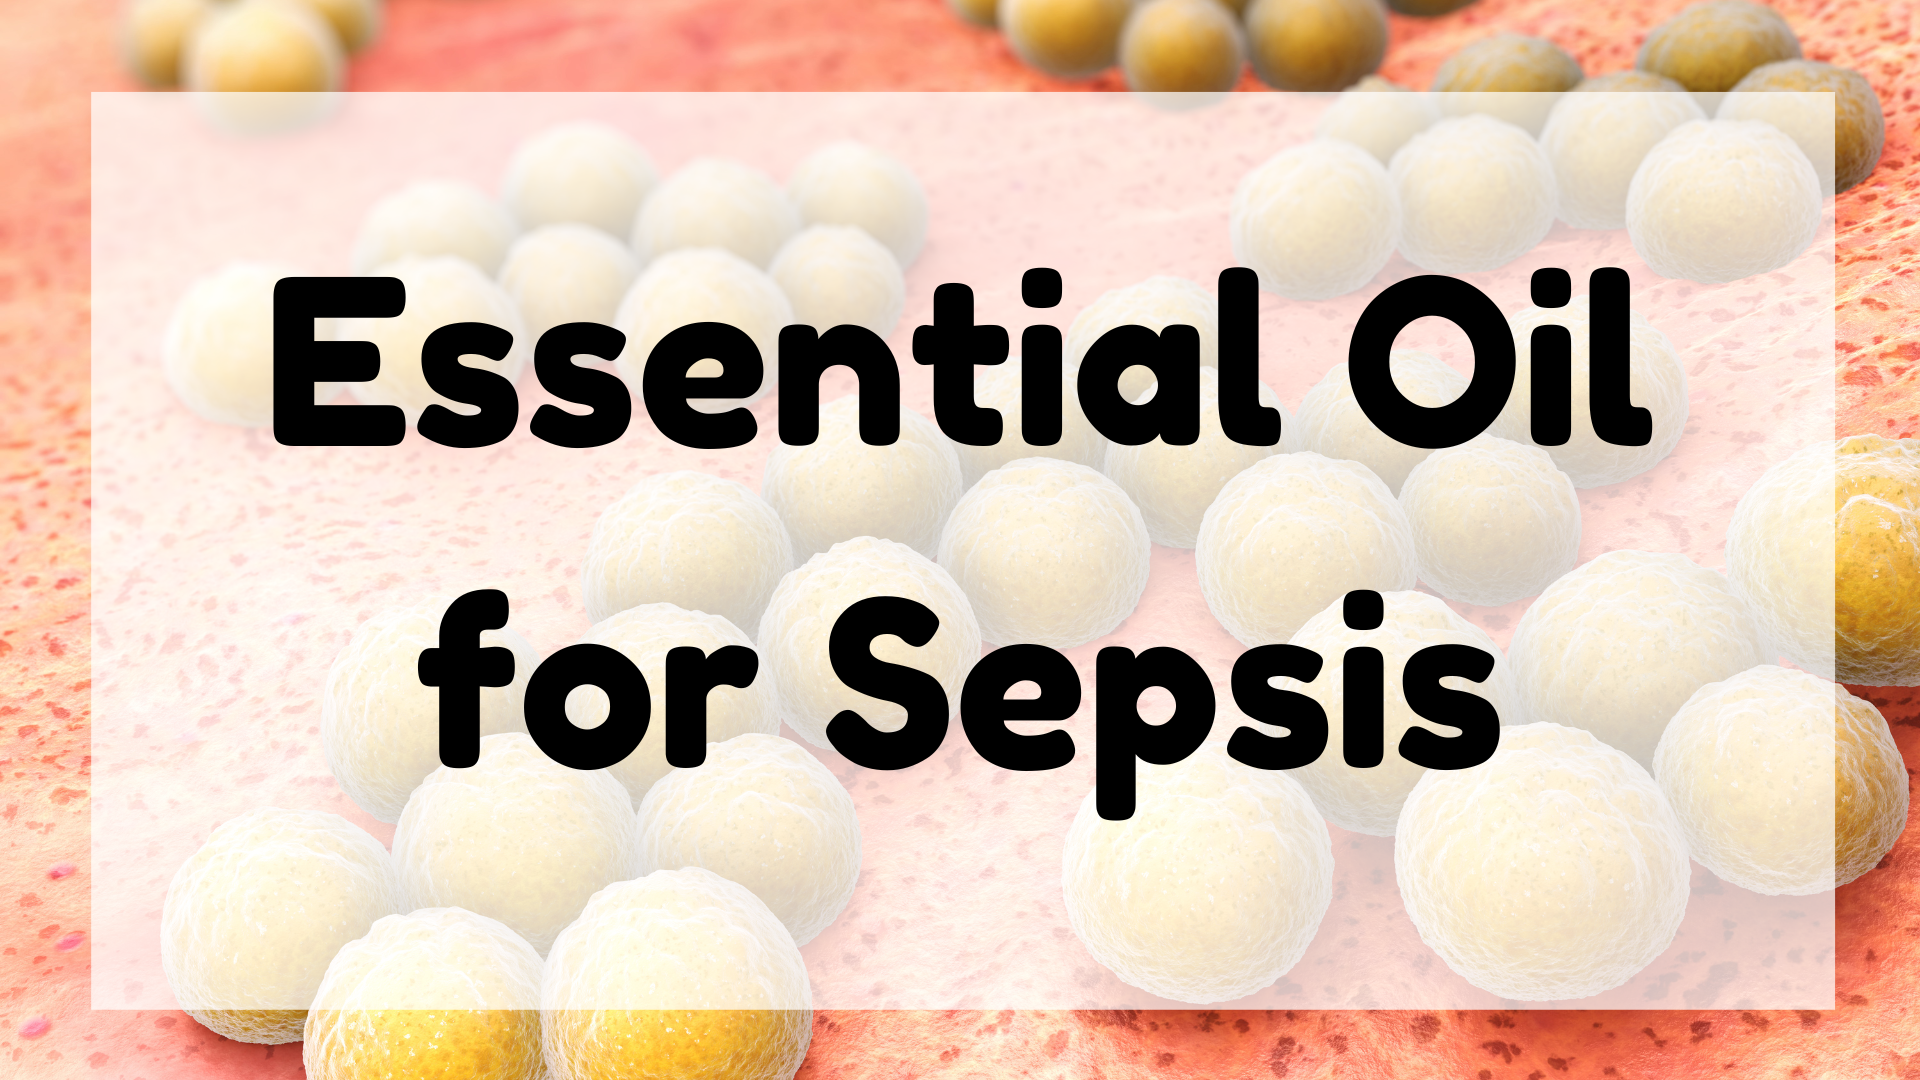 Essential Oil for Sepsis featured image